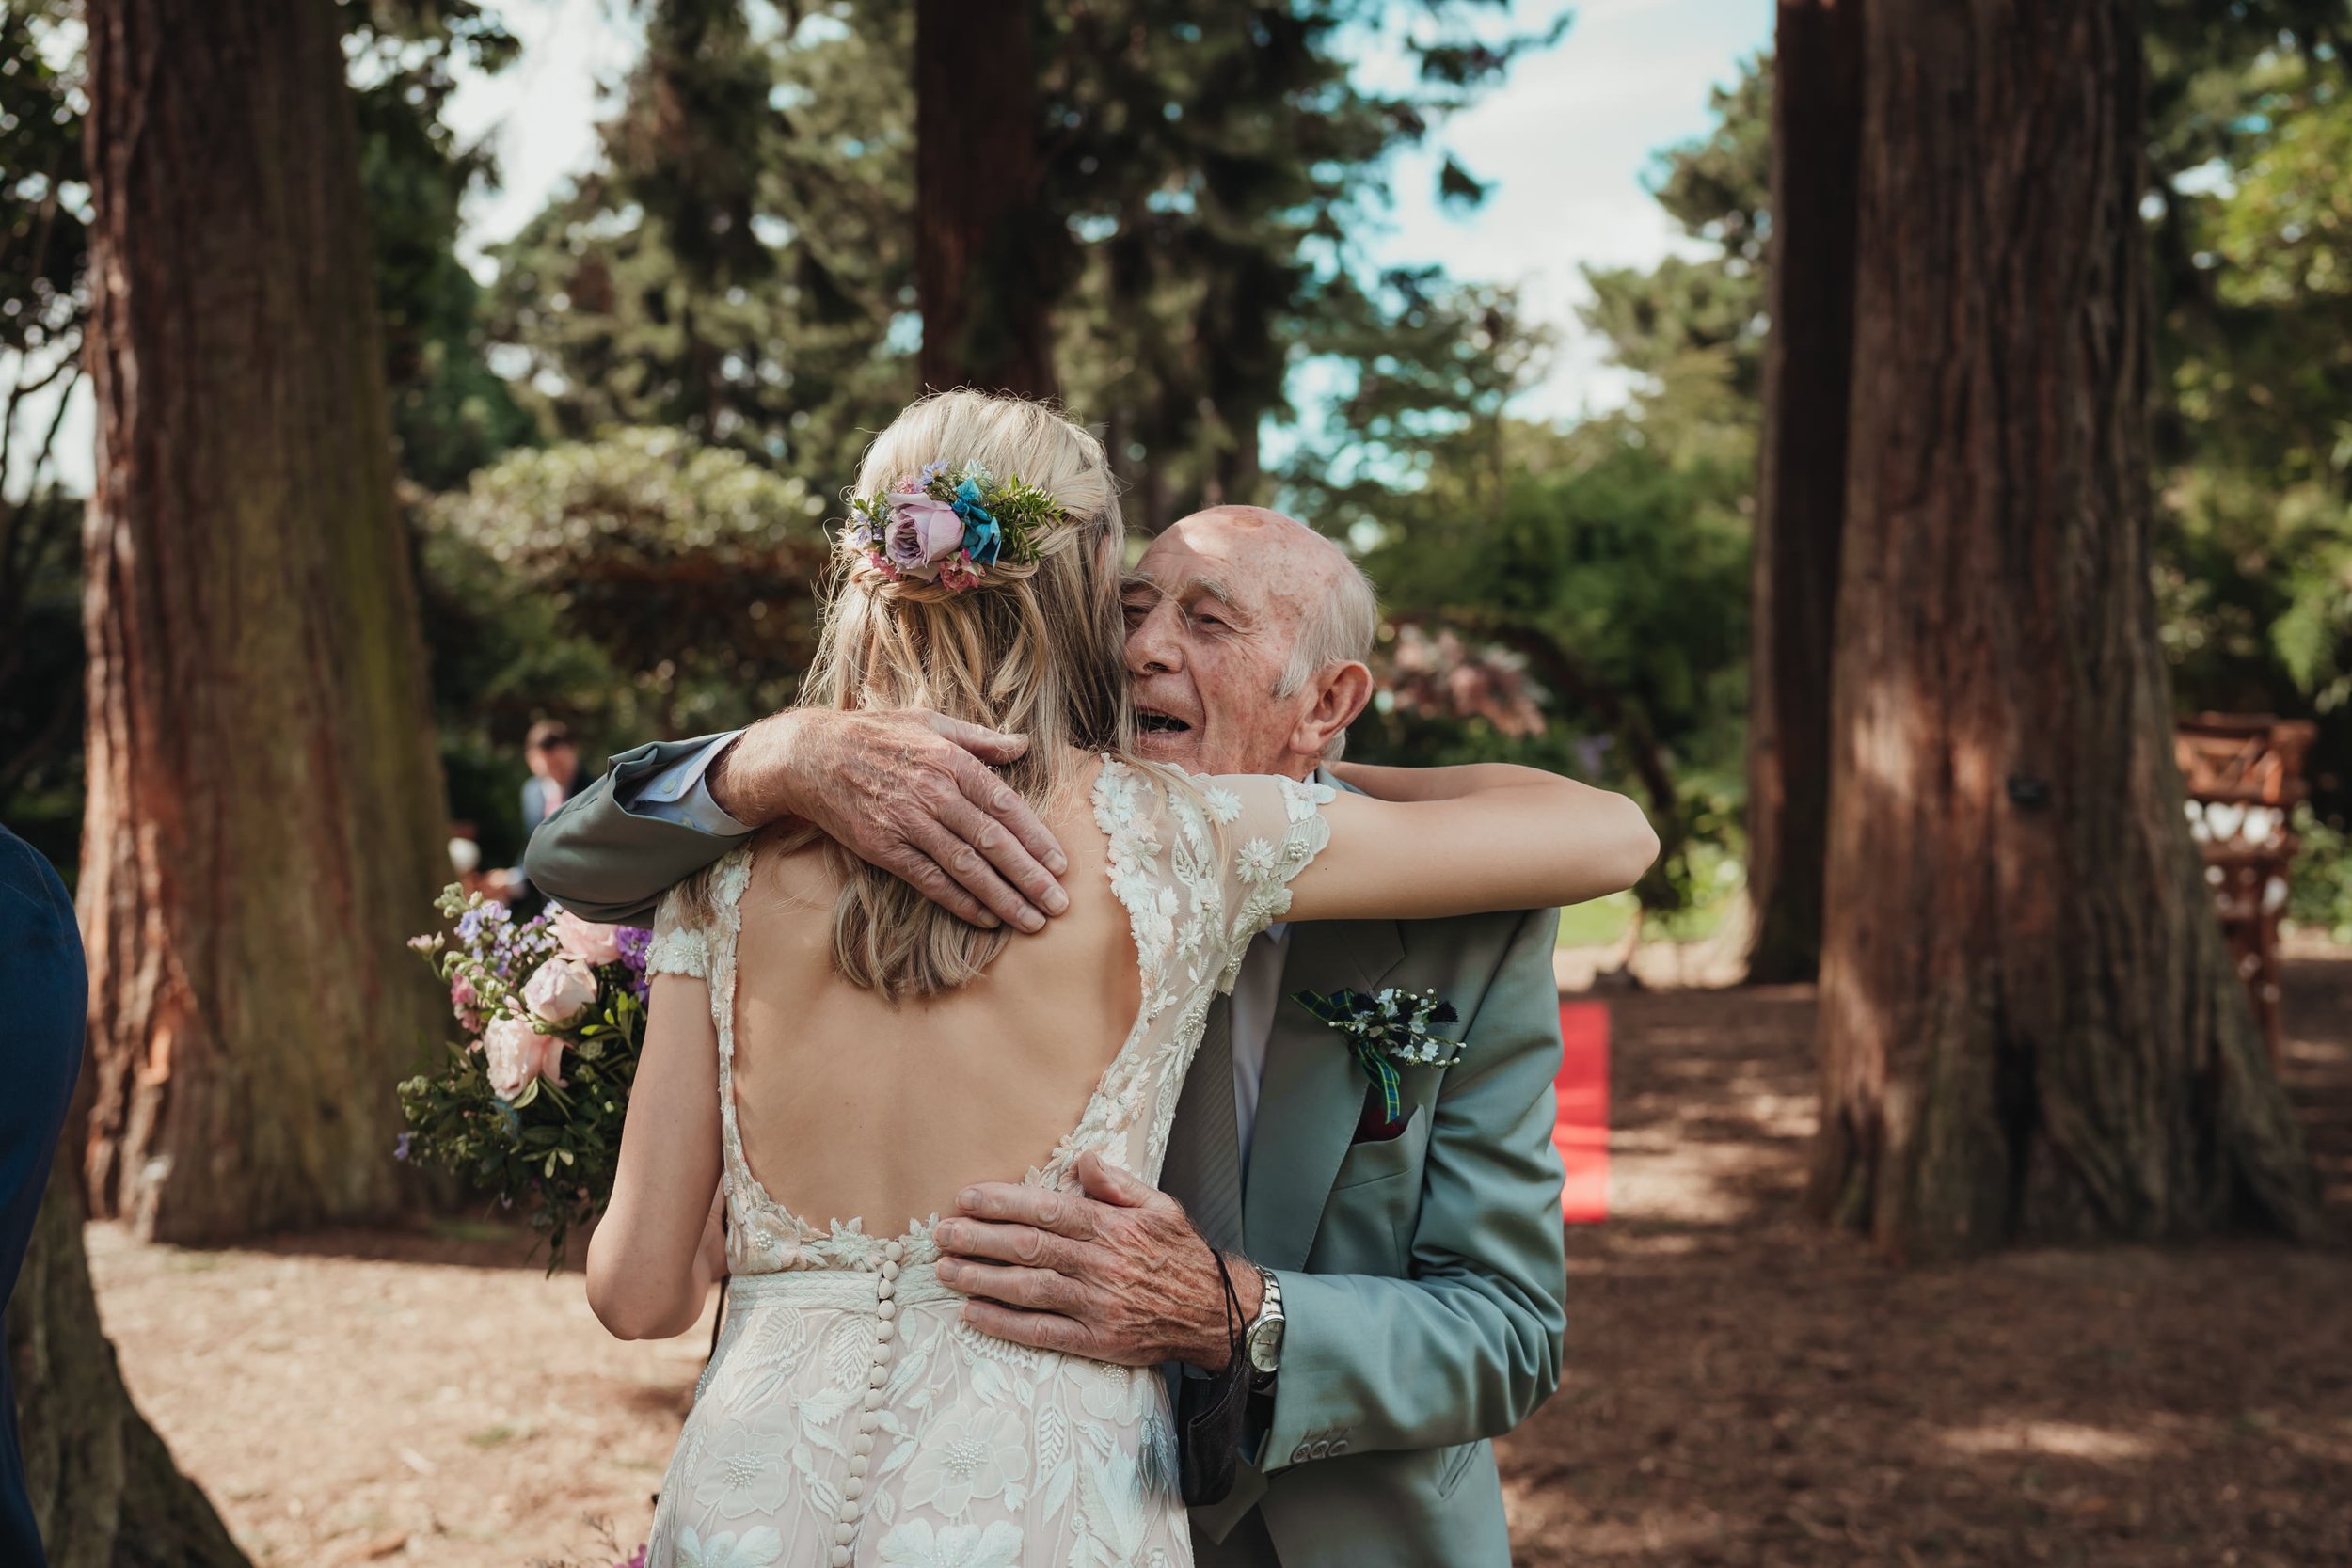 glasgow wedding photographer captures the bride hugging a guest in a wooded area with trees visible in the background